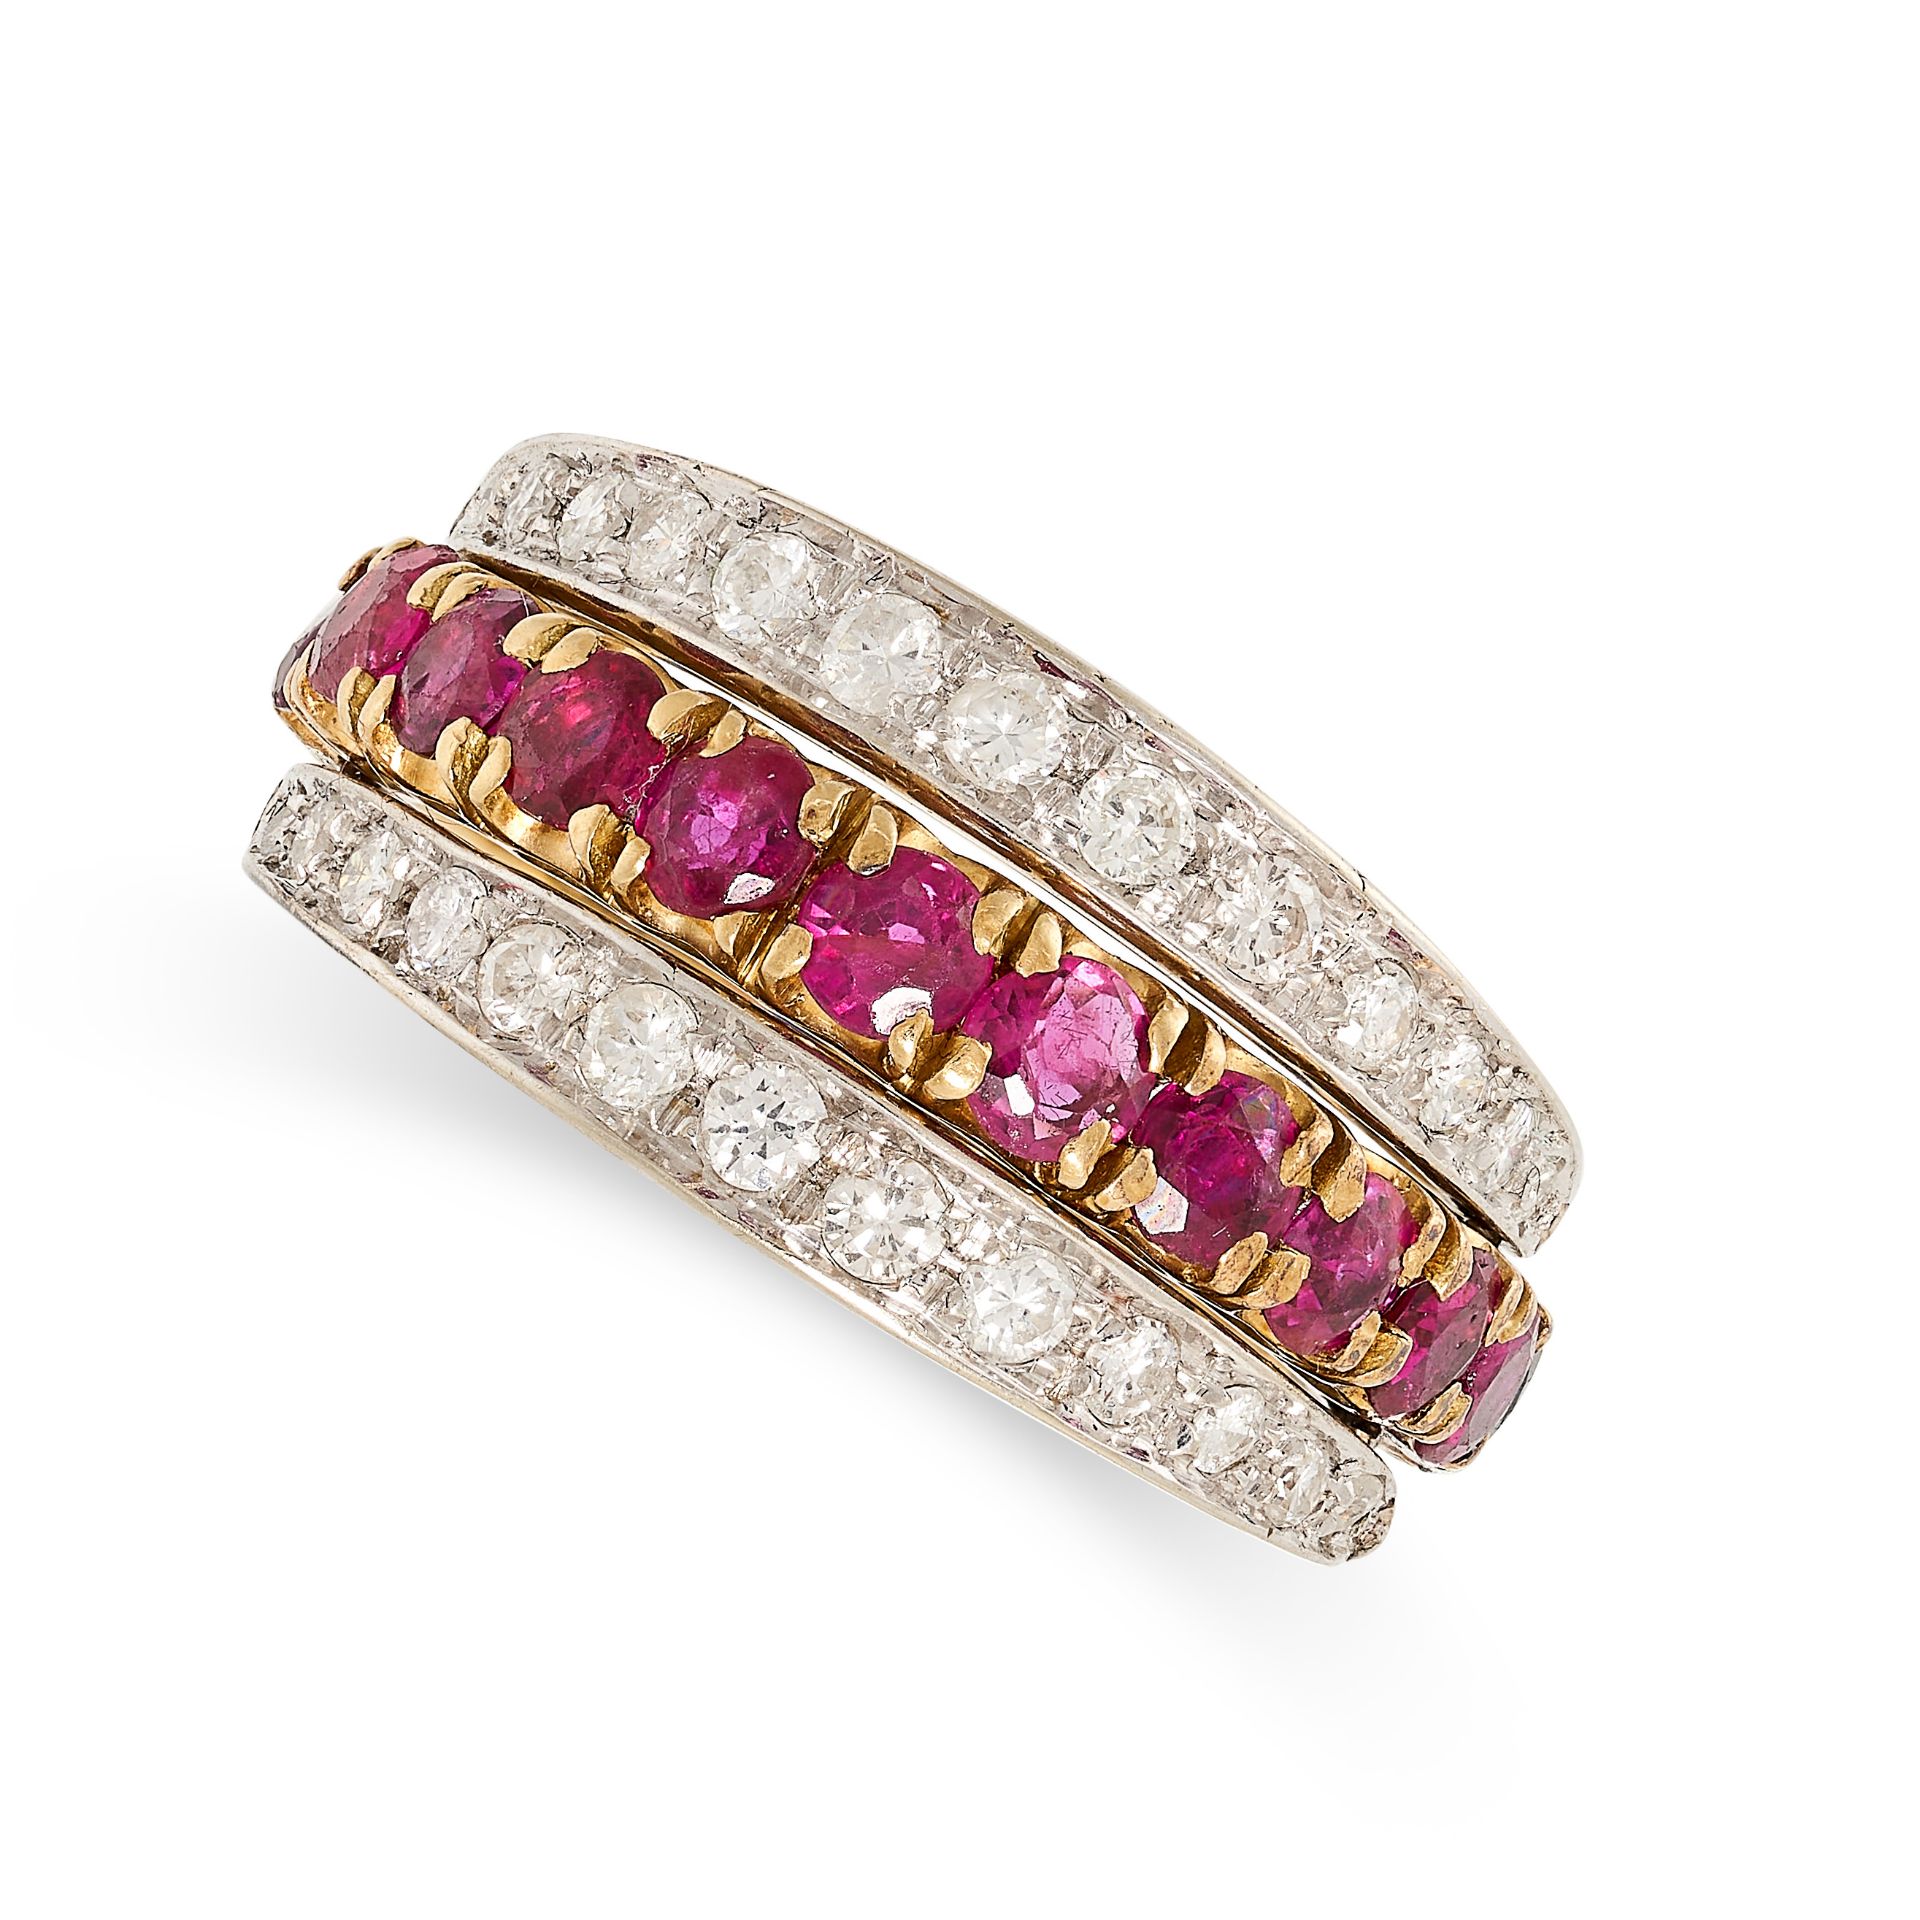 A SAPPHIRE, RUBY AND DIAMOND REVERSIBLE RING the central band half set with round cut sapphires